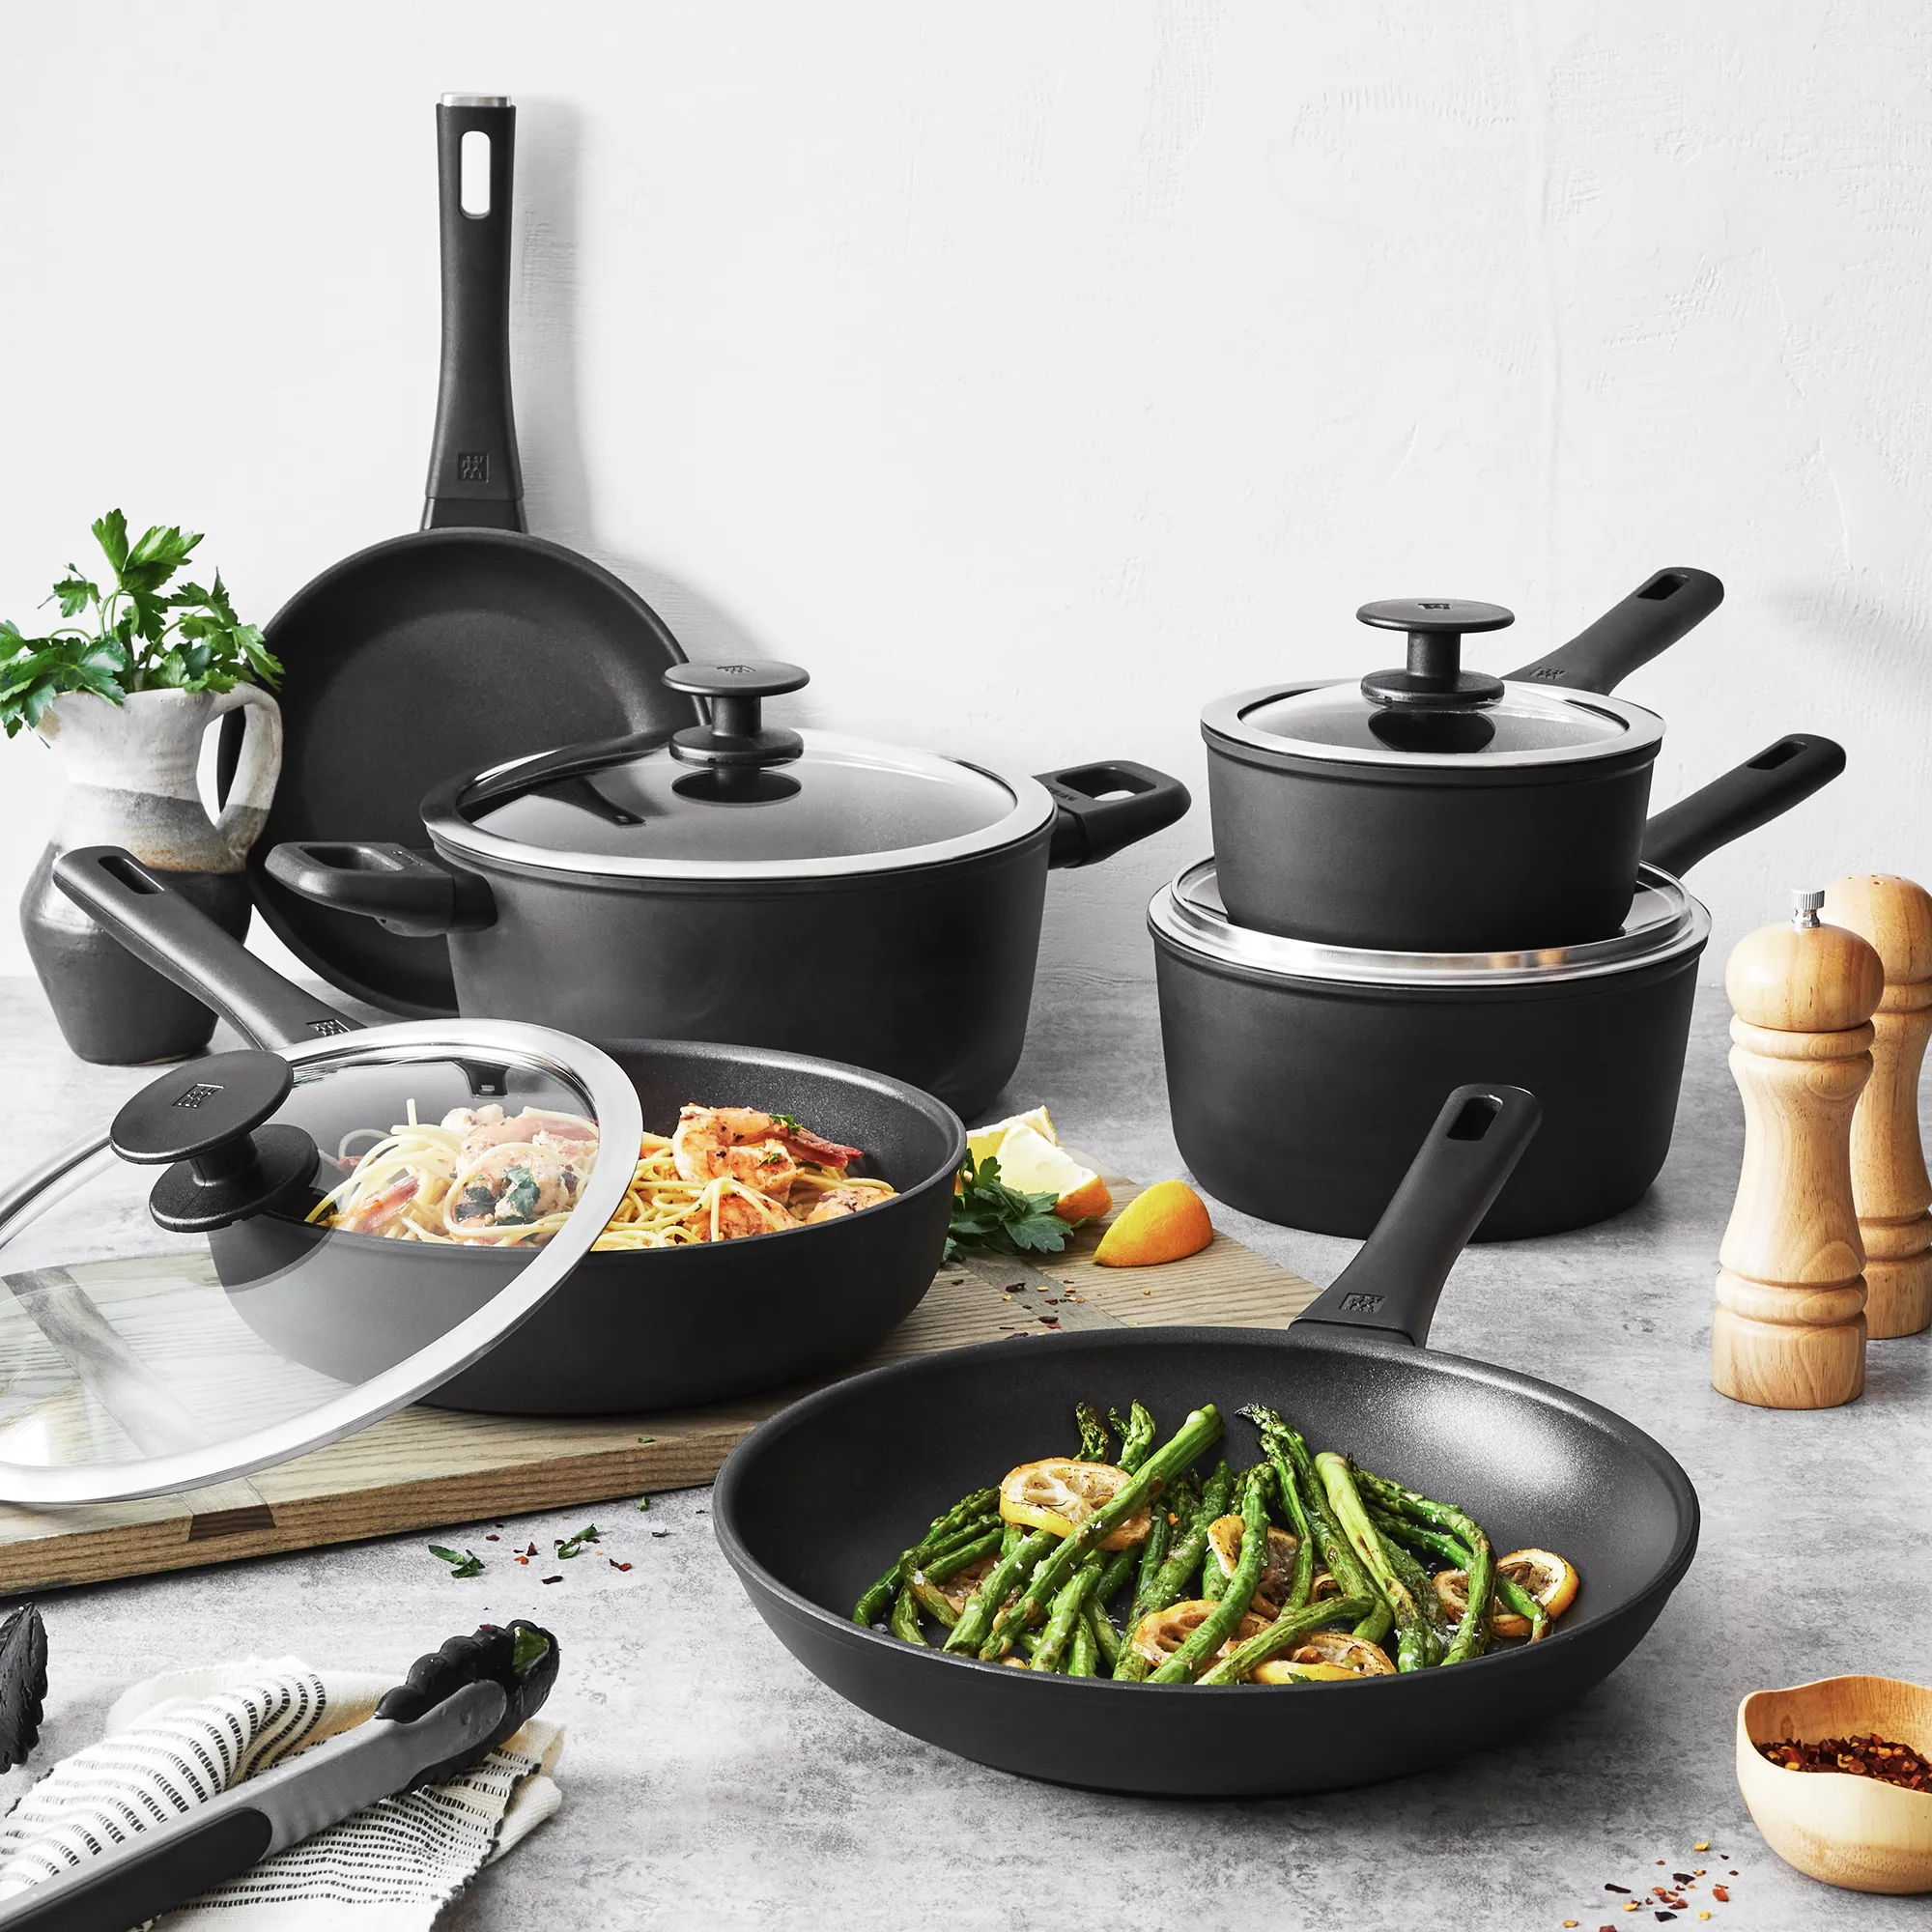 https://www.homethreads.com/files/zwilling/1022437-zwilling-madura-plus-forged-10-pc-aluminum-nonstick-cookware-set-2.webp